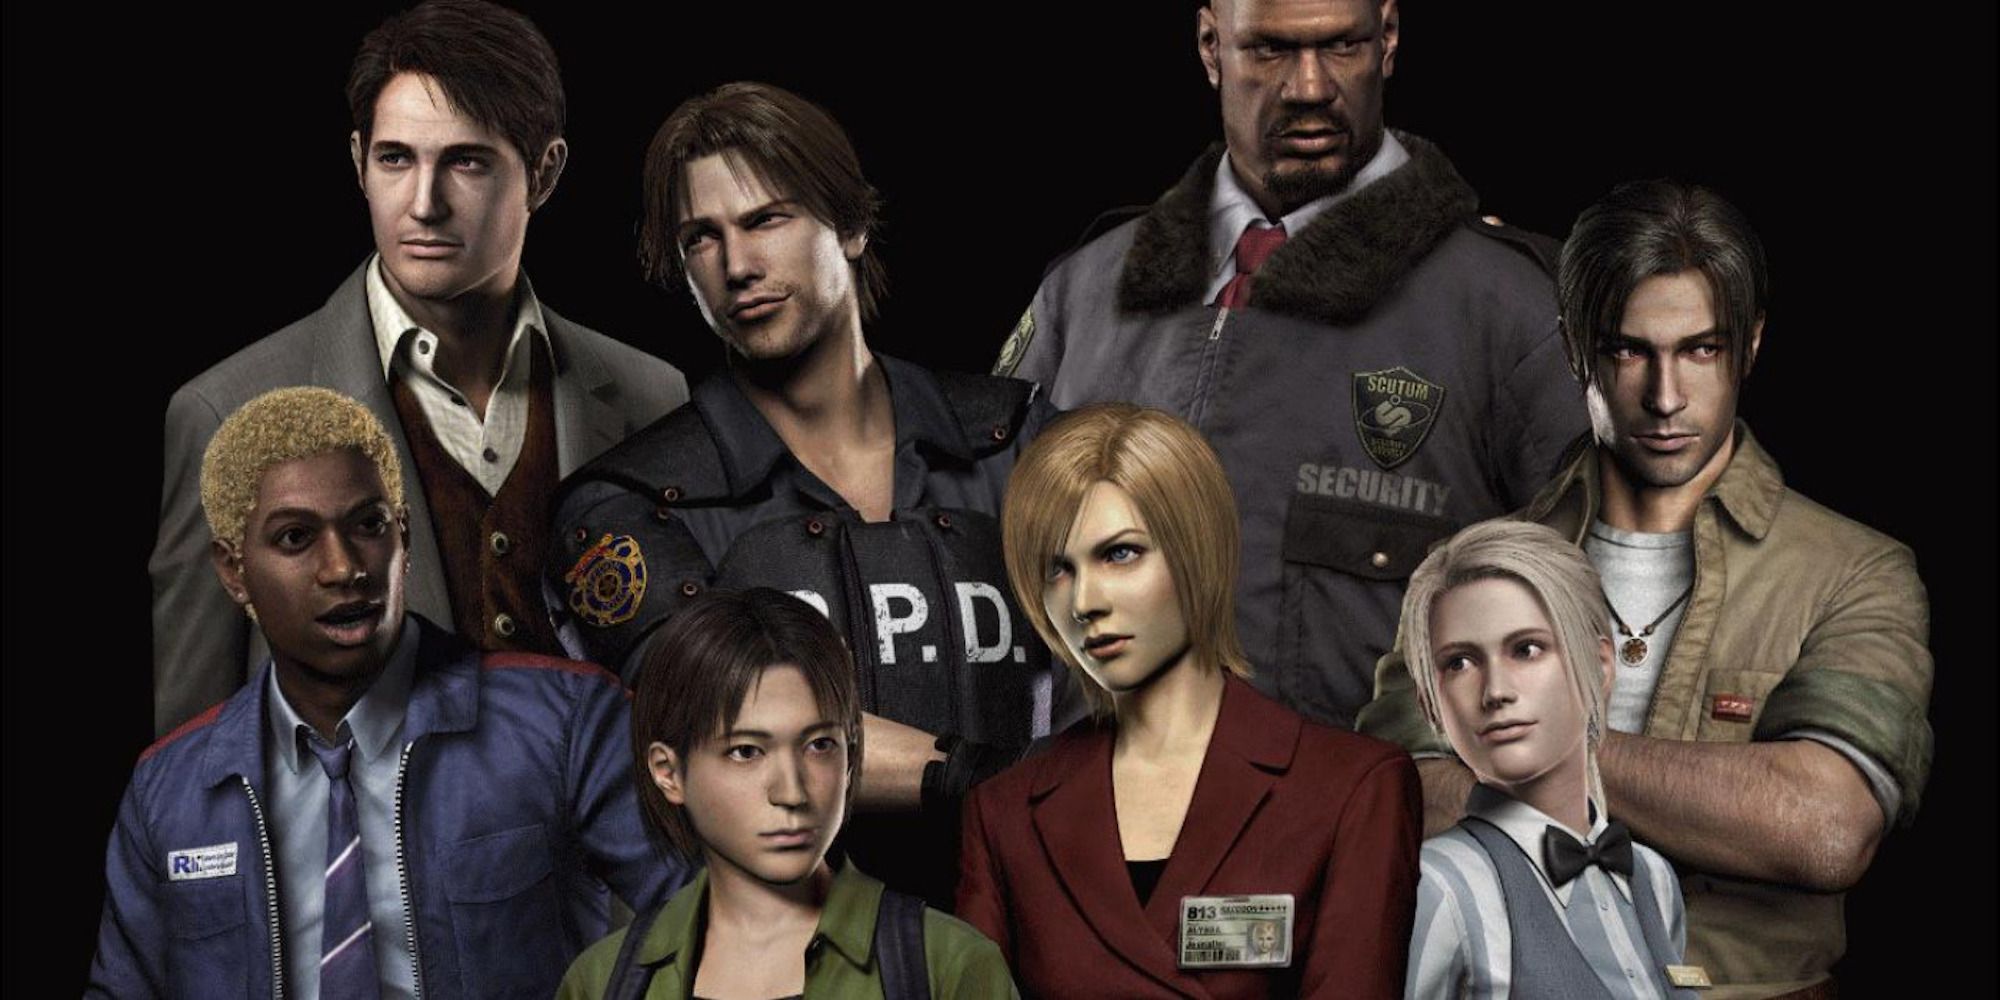 Promo art featuring characters in Resident Evil Outbreak